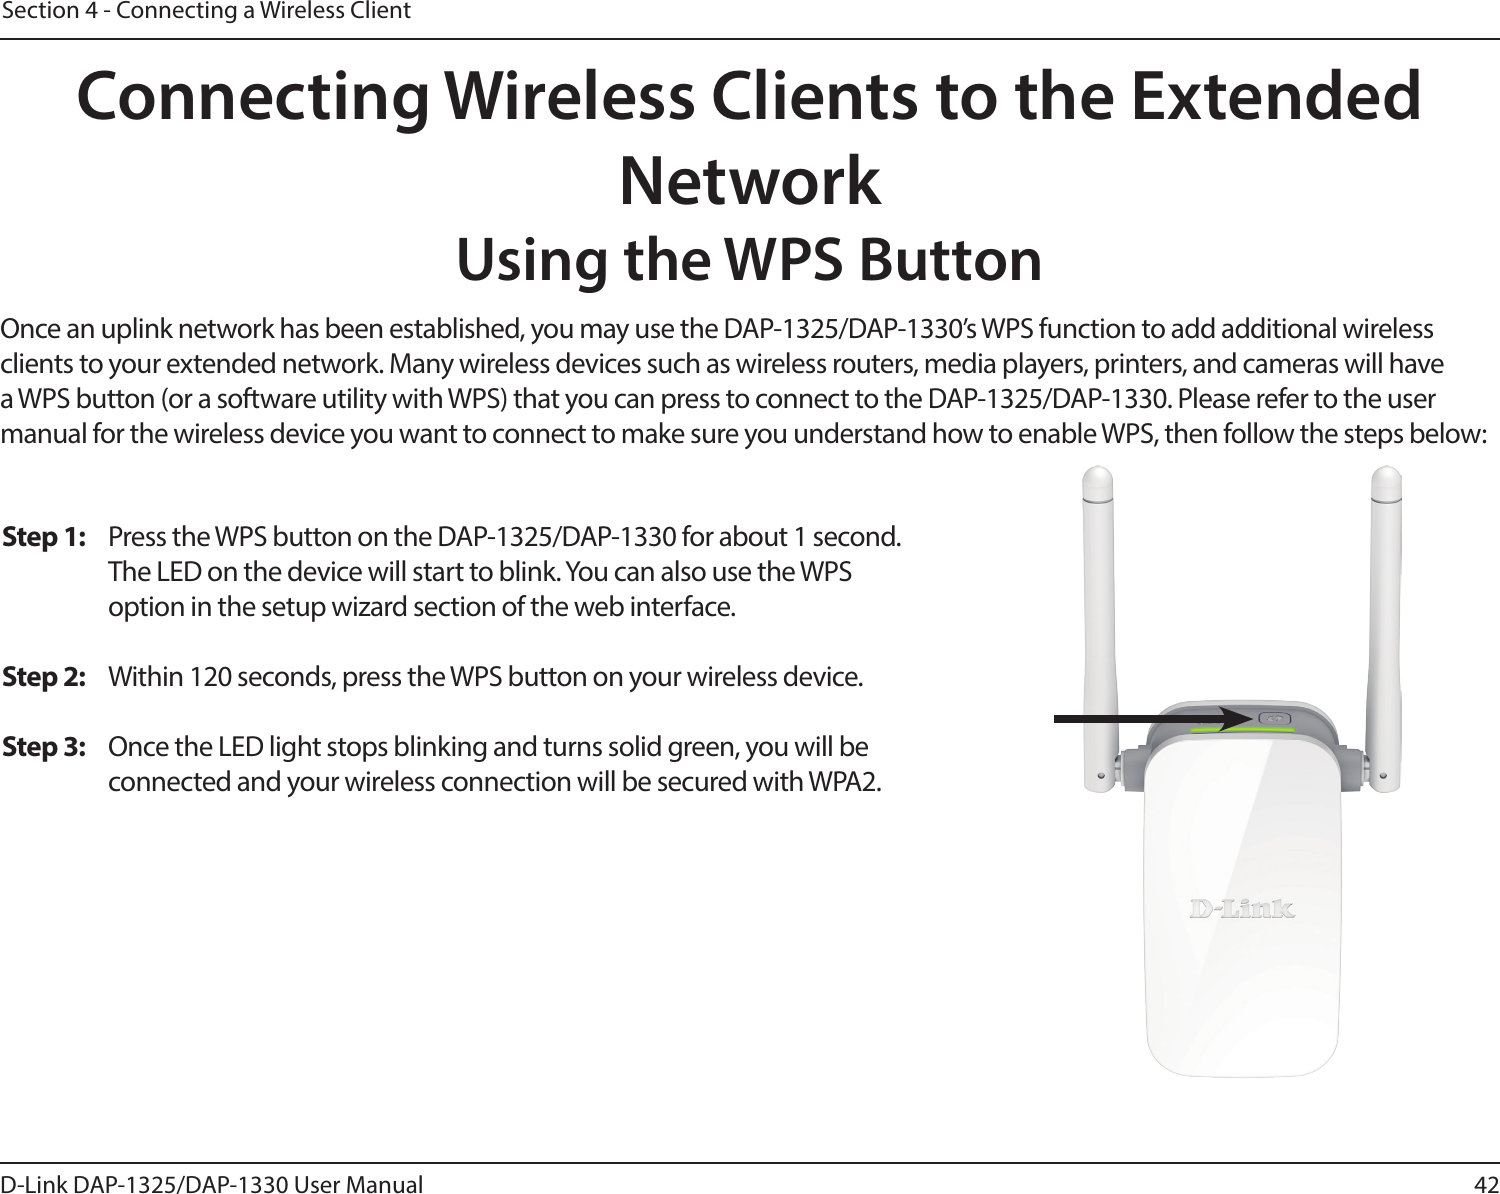 42D-Link DAP-1325/DAP-1330 User ManualSection 4 - Connecting a Wireless ClientConnecting Wireless Clients to the Extended NetworkUsing the WPS ButtonOnce an uplink network has been established, you may use the DAP-1325/DAP-1330’s WPS function to add additional wireless clients to your extended network. Many wireless devices such as wireless routers, media players, printers, and cameras will have a WPS button (or a software utility with WPS) that you can press to connect to the DAP-1325/DAP-1330. Please refer to the user manual for the wireless device you want to connect to make sure you understand how to enable WPS, then follow the steps below:Step 1:  Press the WPS button on the DAP-1325/DAP-1330 for about 1 second. The LED on the device will start to blink. You can also use the WPS option in the setup wizard section of the web interface. Step 2:  Within 120 seconds, press the WPS button on your wireless device.Step 3:  Once the LED light stops blinking and turns solid green, you will be connected and your wireless connection will be secured with WPA2.